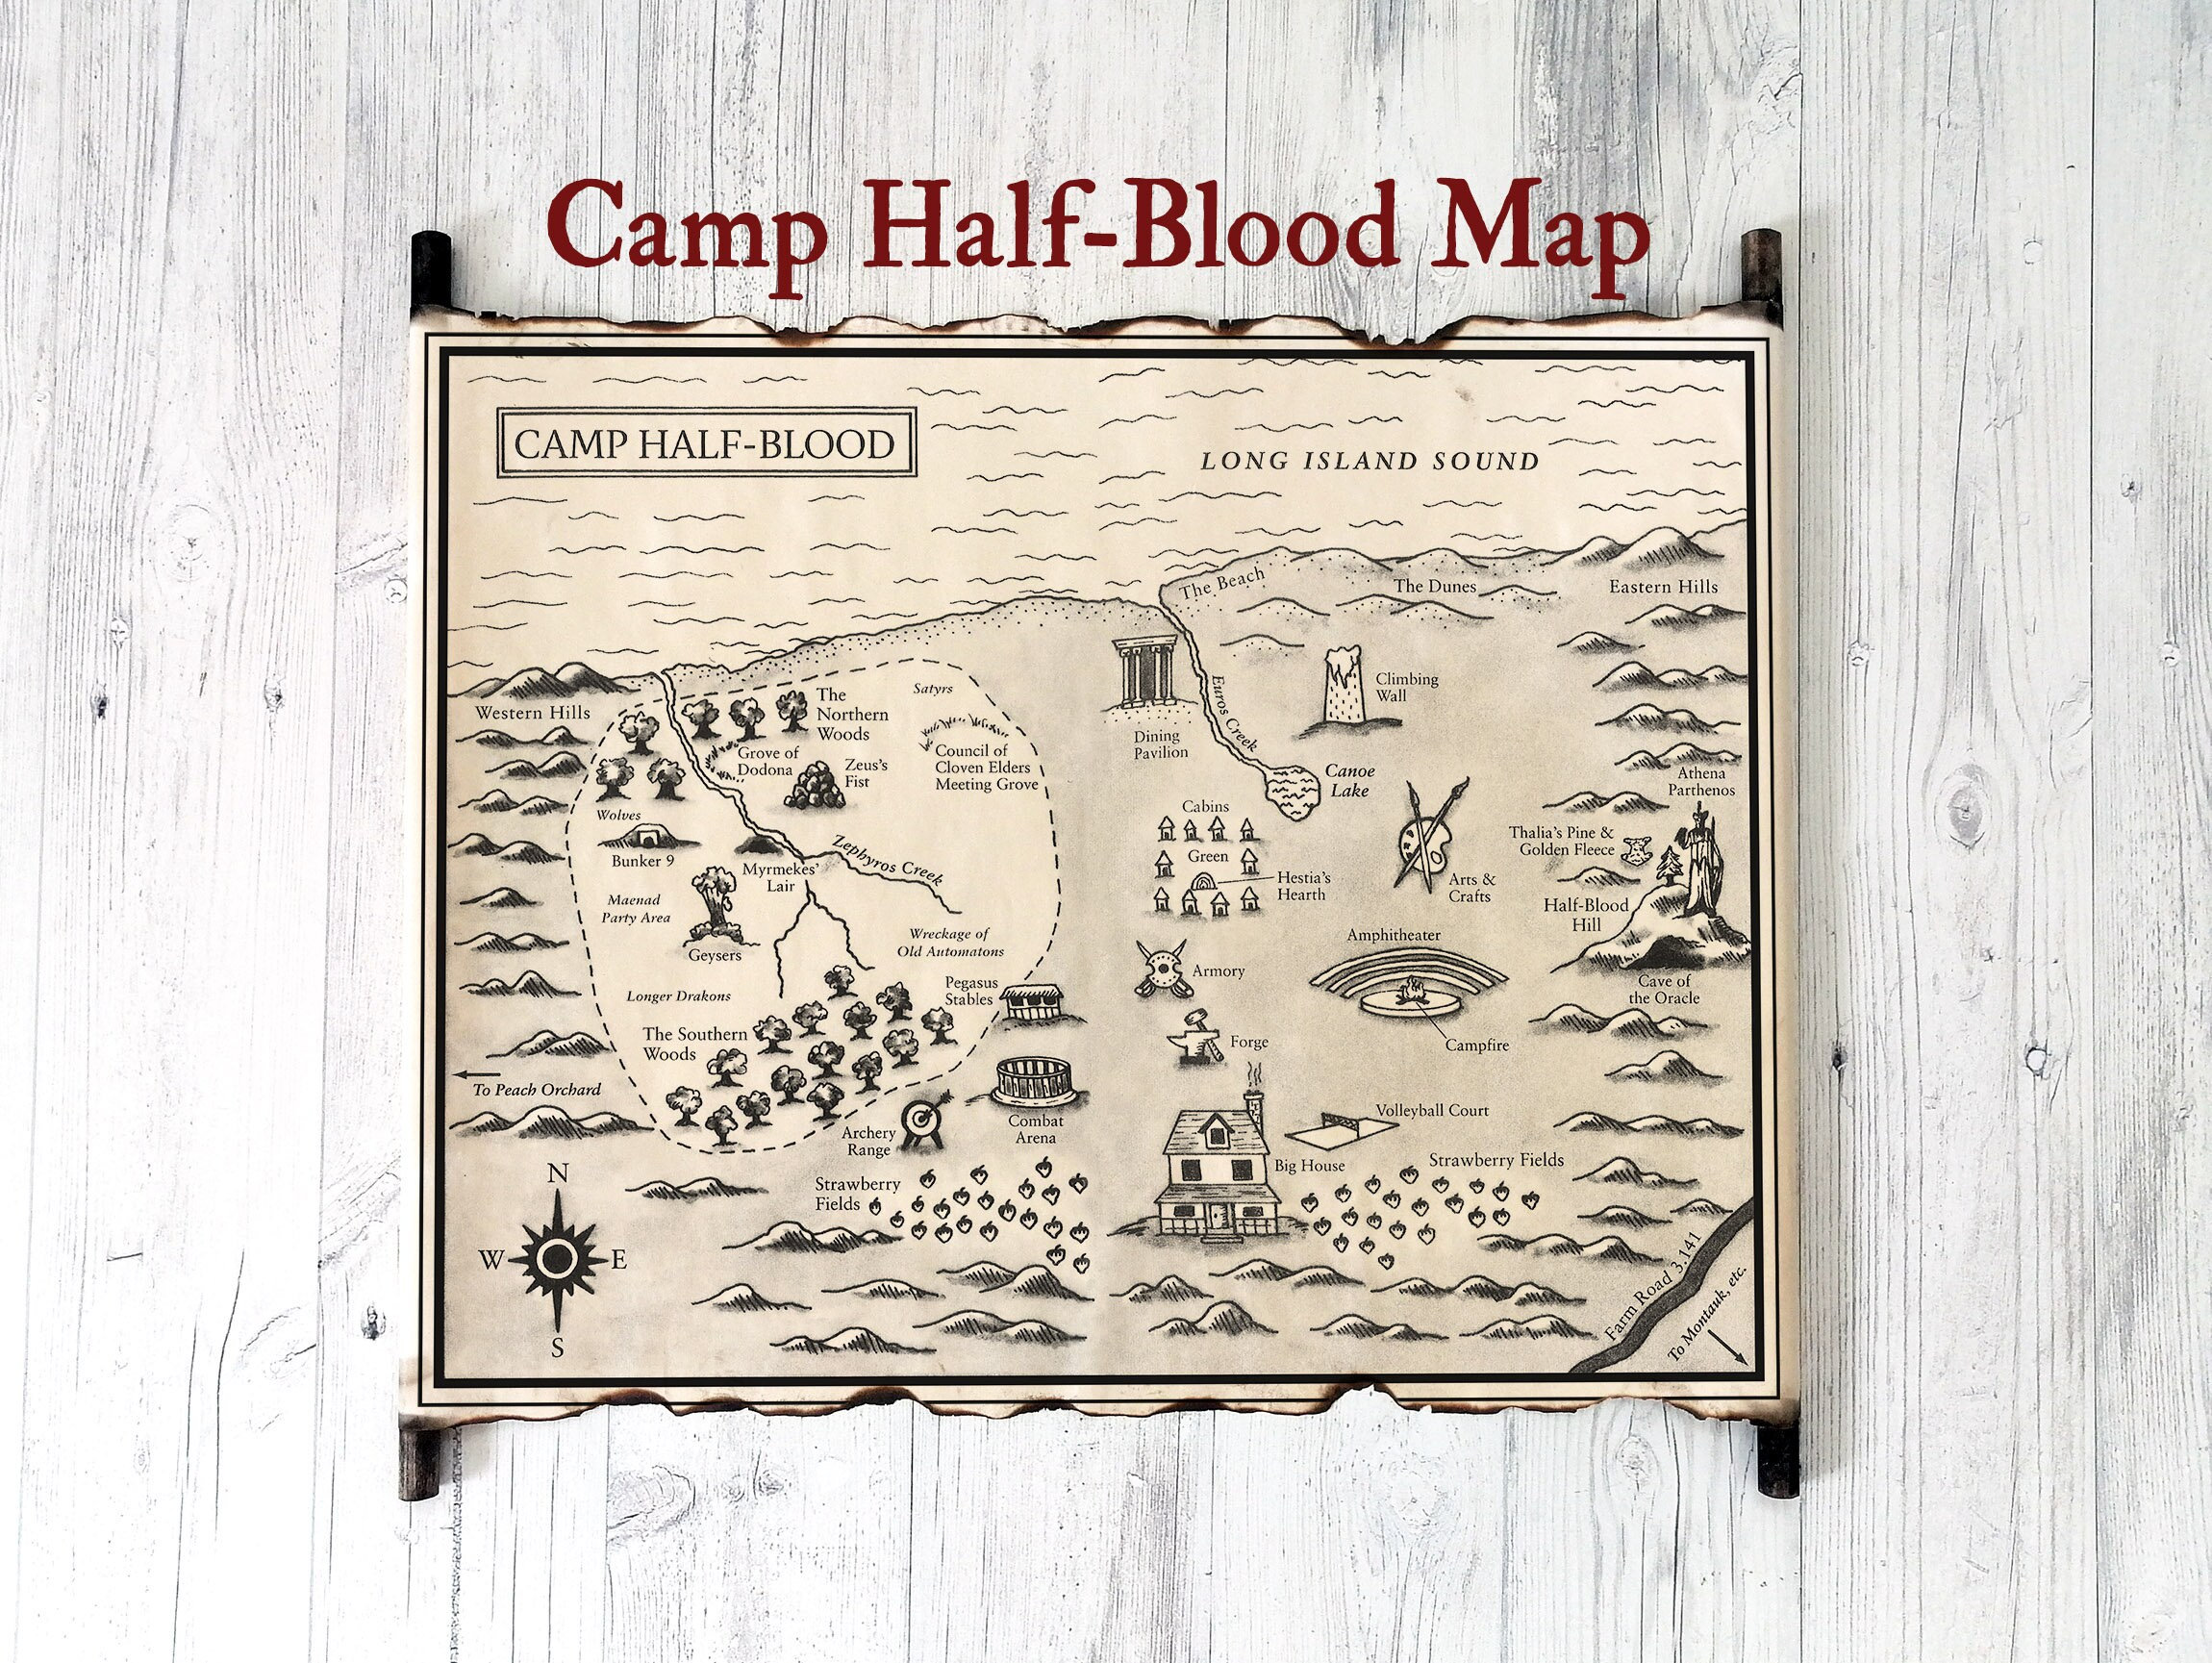 Map of Camp Half Blood Spiral Notebook for Sale by Nakamoto99